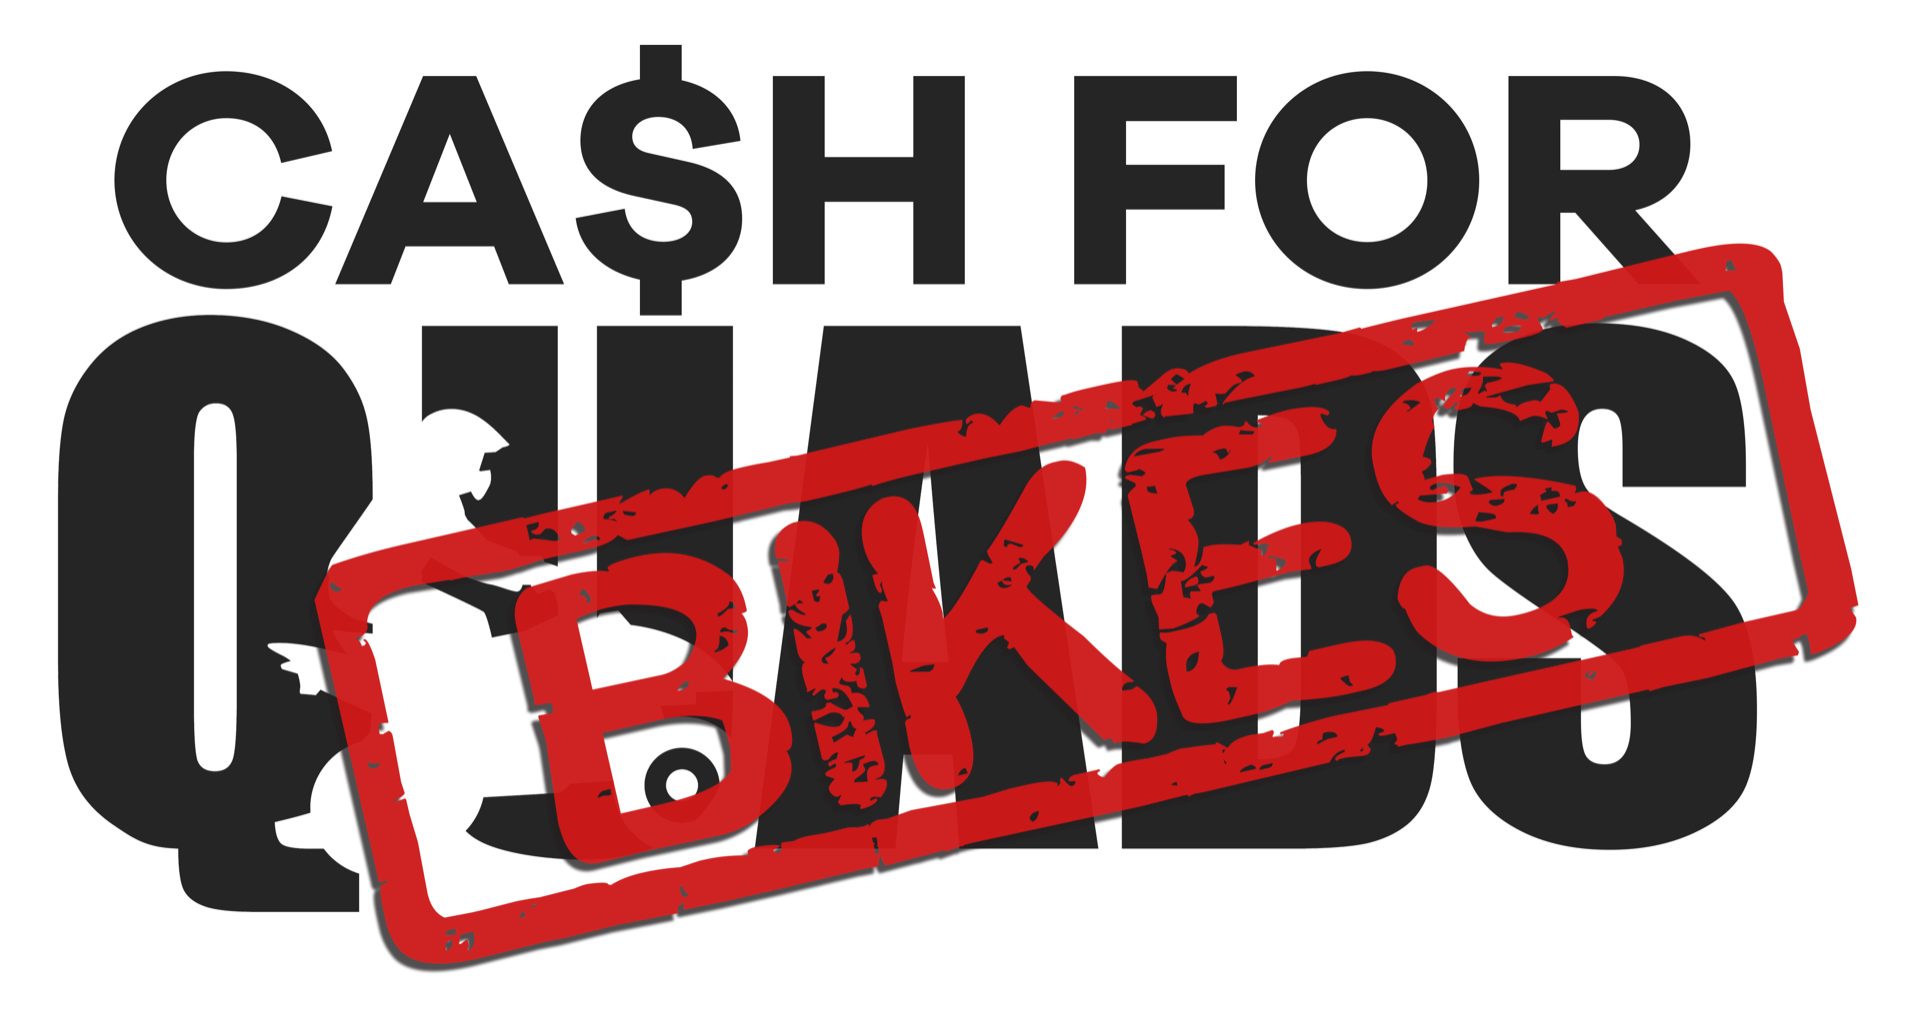 Cash For Quads? How About Cash For Bikes? We Want Your Motorcycles, Too!